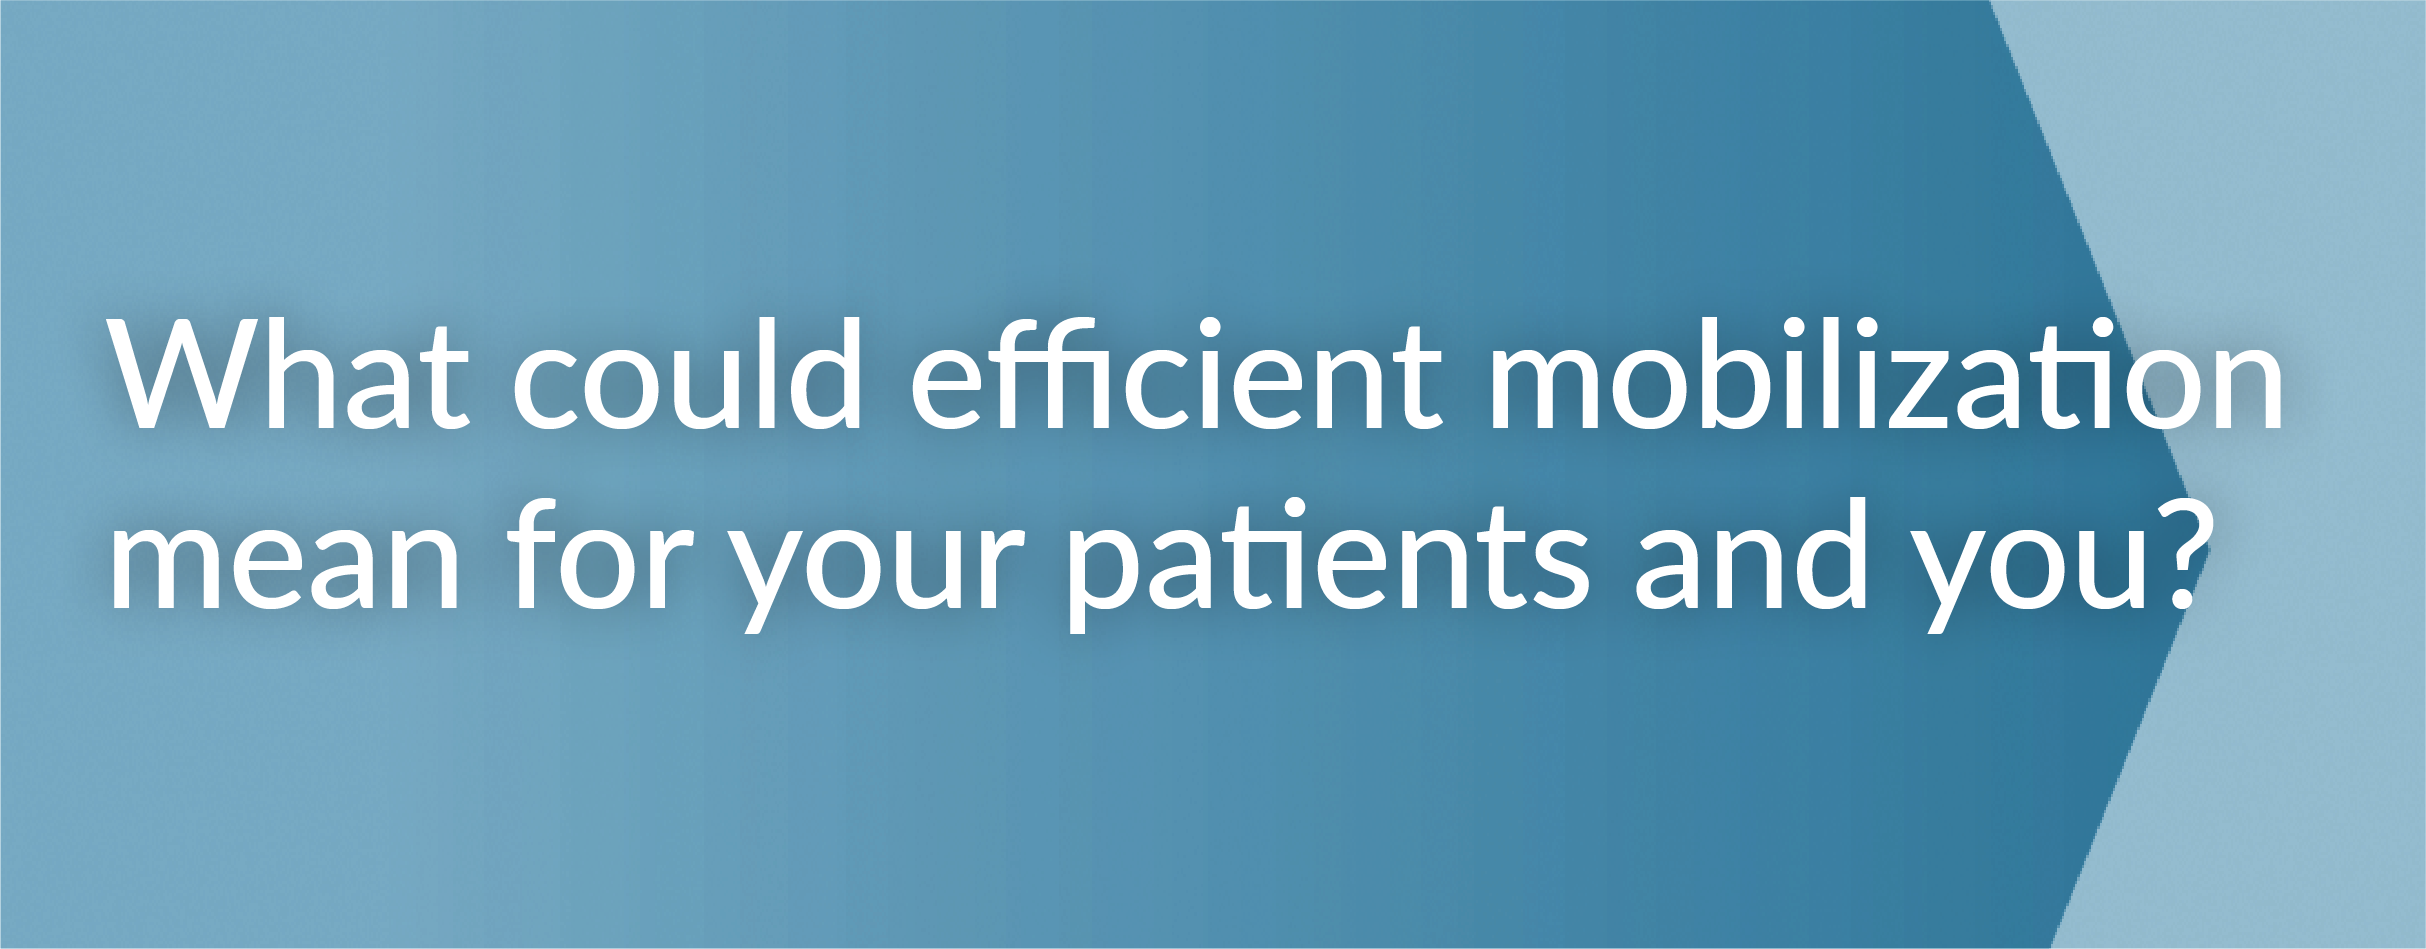 An image asking what could efficient mobilization mean for your patients and you?